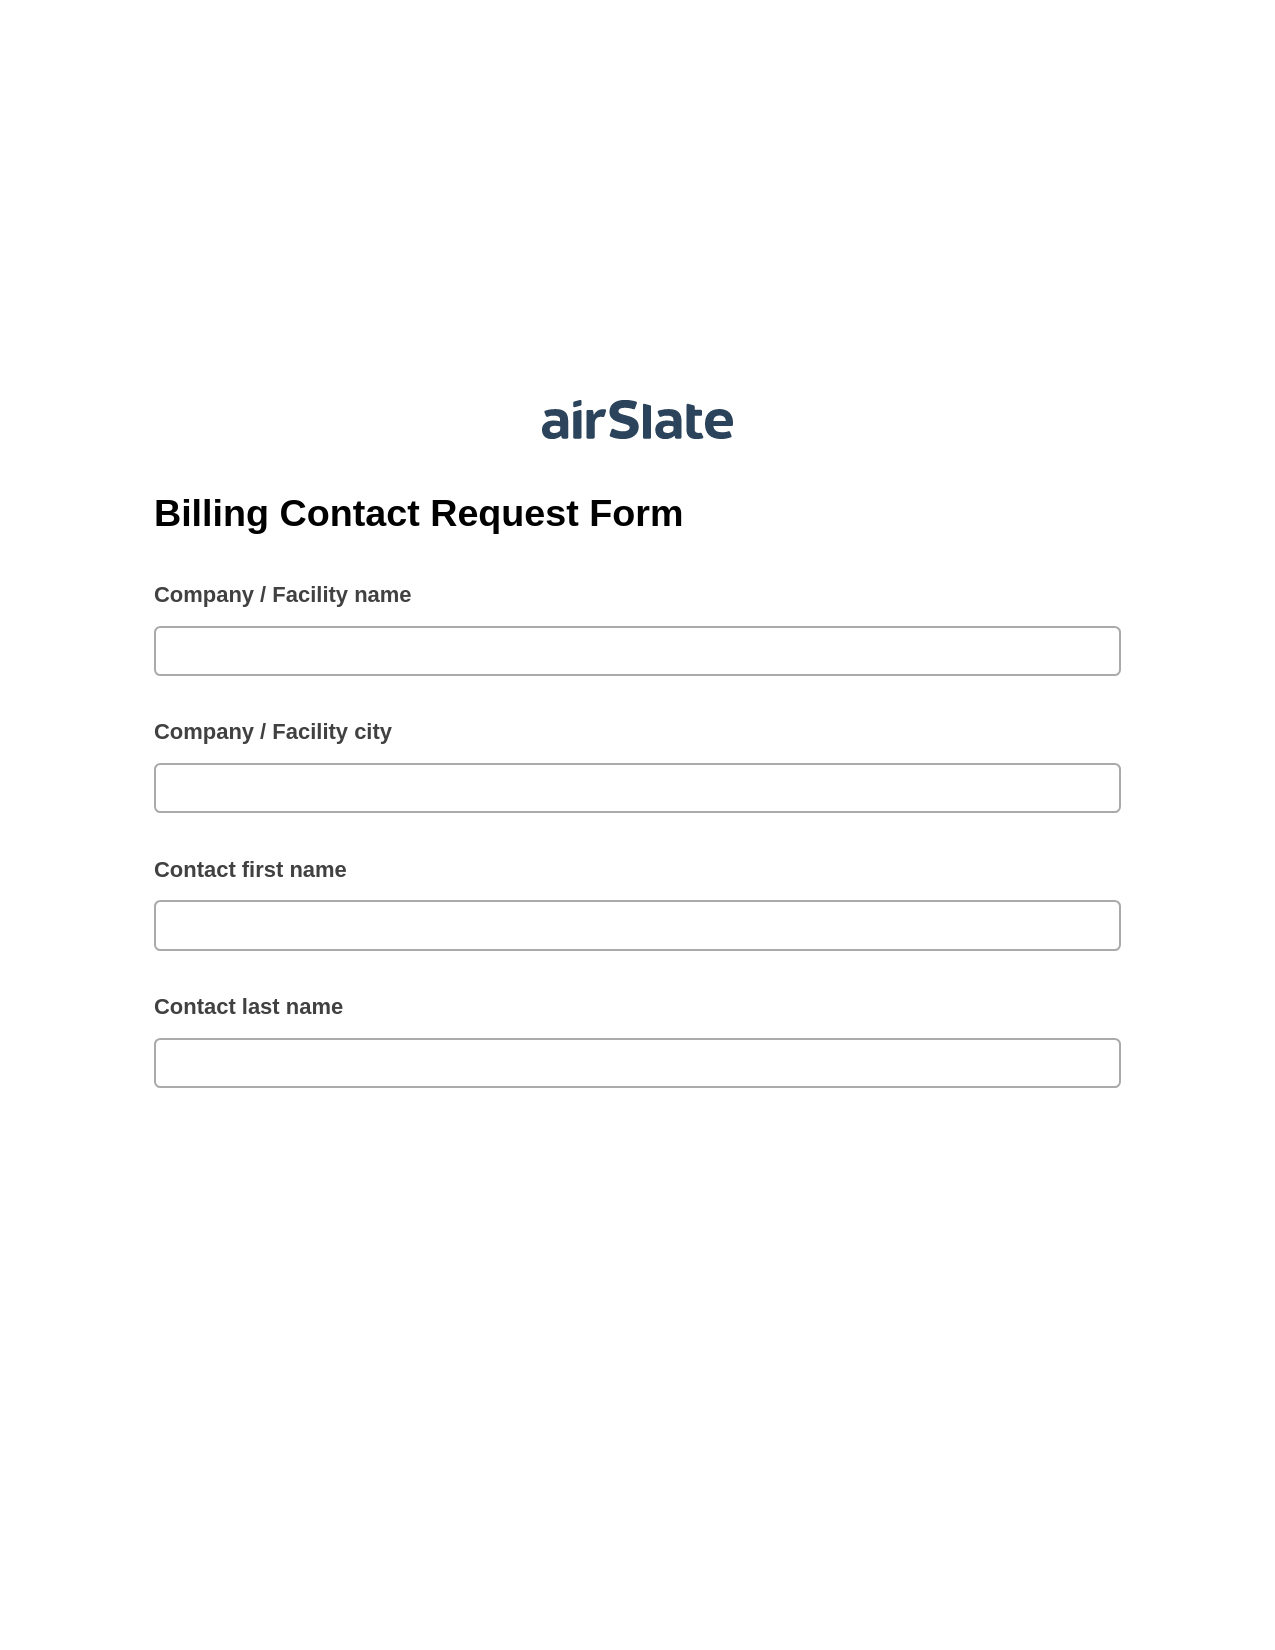 Multirole Billing Contact Request Form Pre-fill Dropdowns from MySQL Bot, Lock the slate bot, Export to MySQL Bot